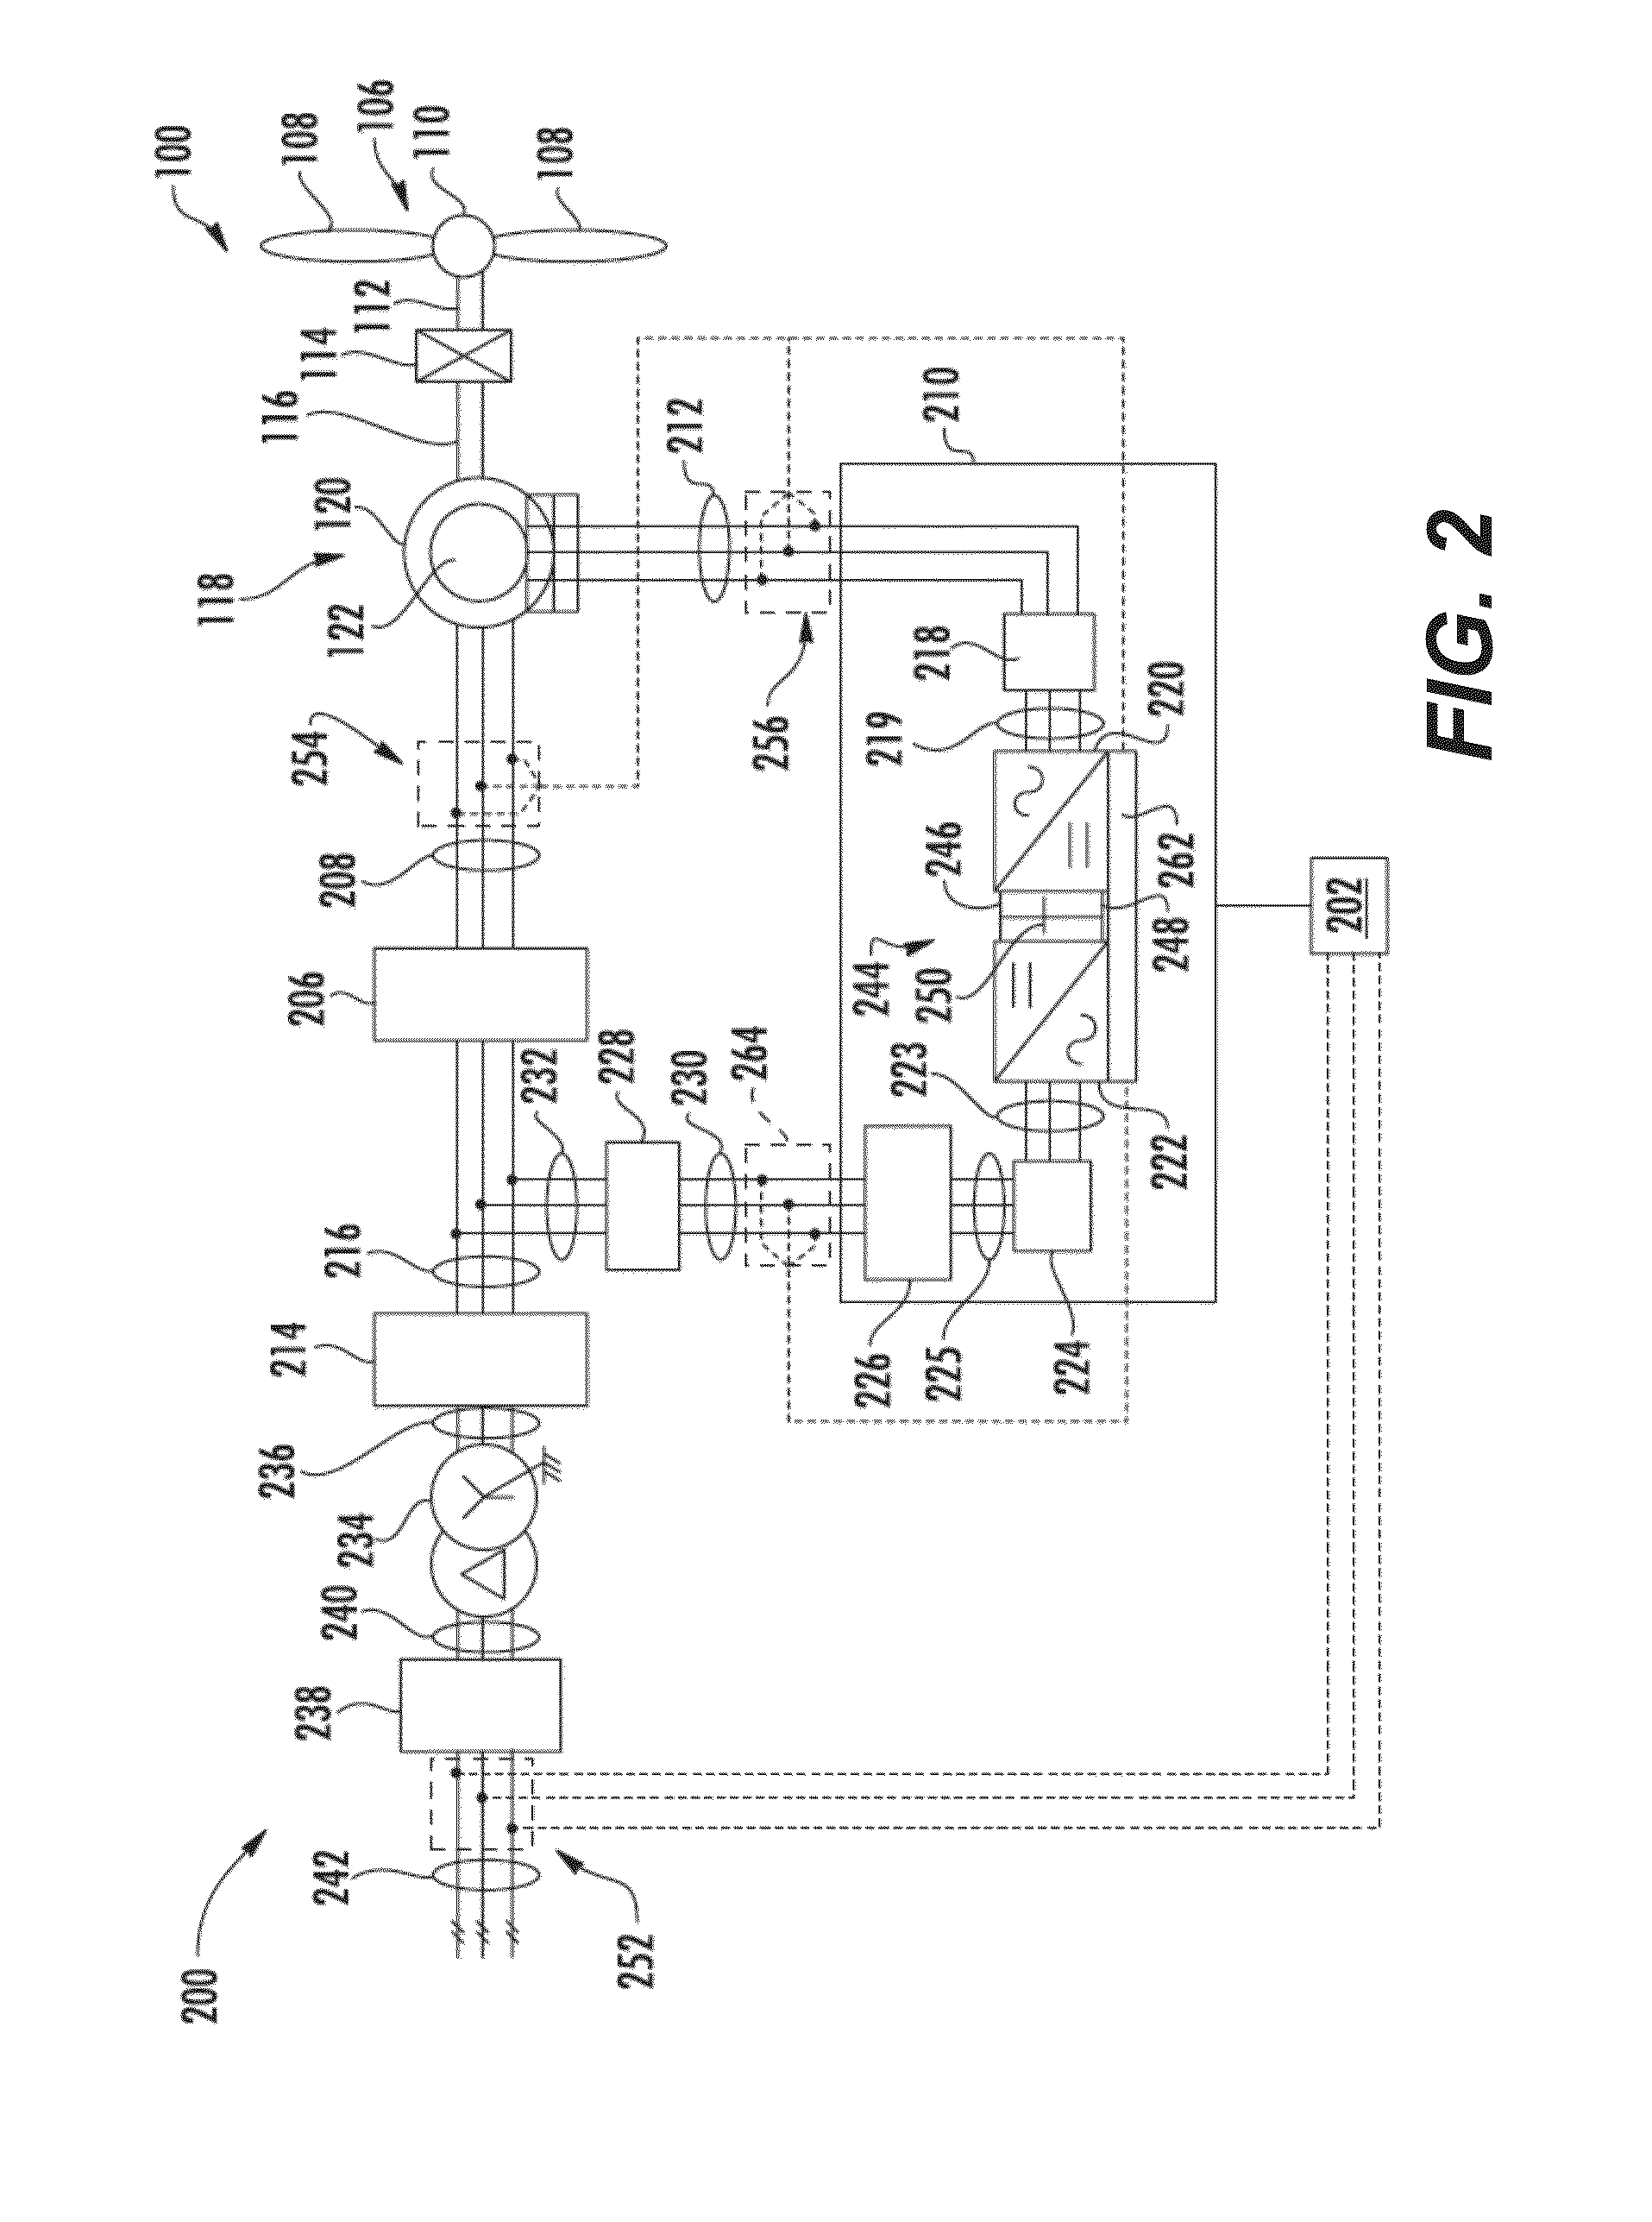 Automated method and apparatus for testing a crowbar circuit of a power converter